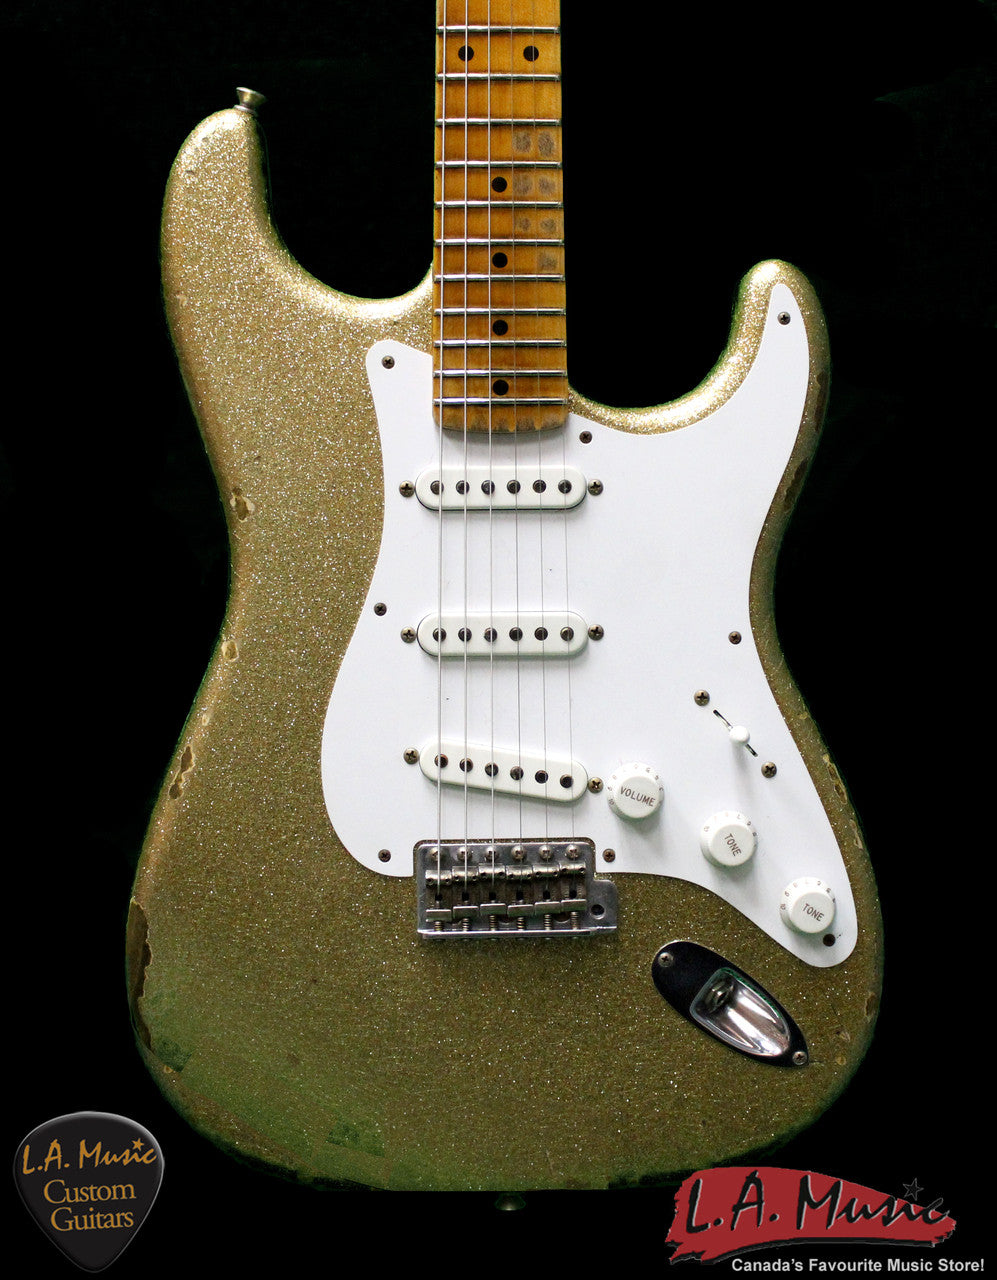 Fender Custom Shop 1954 Heavy Relic Stratocaster Gold Sparkle 9230054818 - Serial Number XN2516 - L.A. Music - Canada's Favourite Music Store!